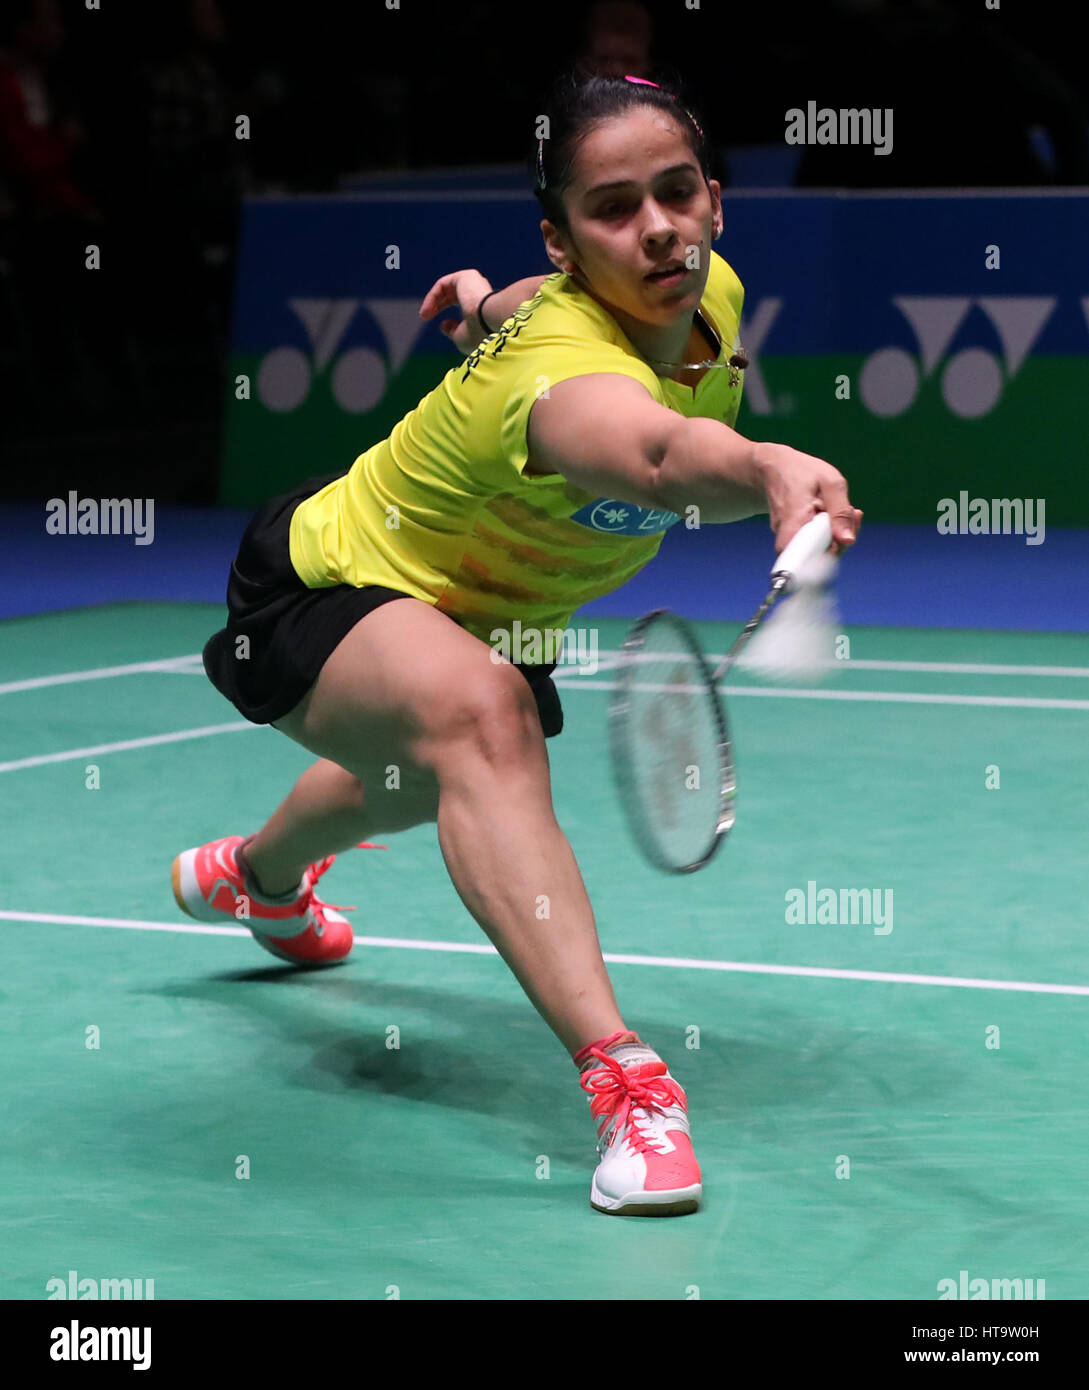 India's Sania Nehwal in action during her Women's singles match during day three of the YONEX All England Open Badminton Championships at the Barclaycard Arena, Birmingham. Stock Photo